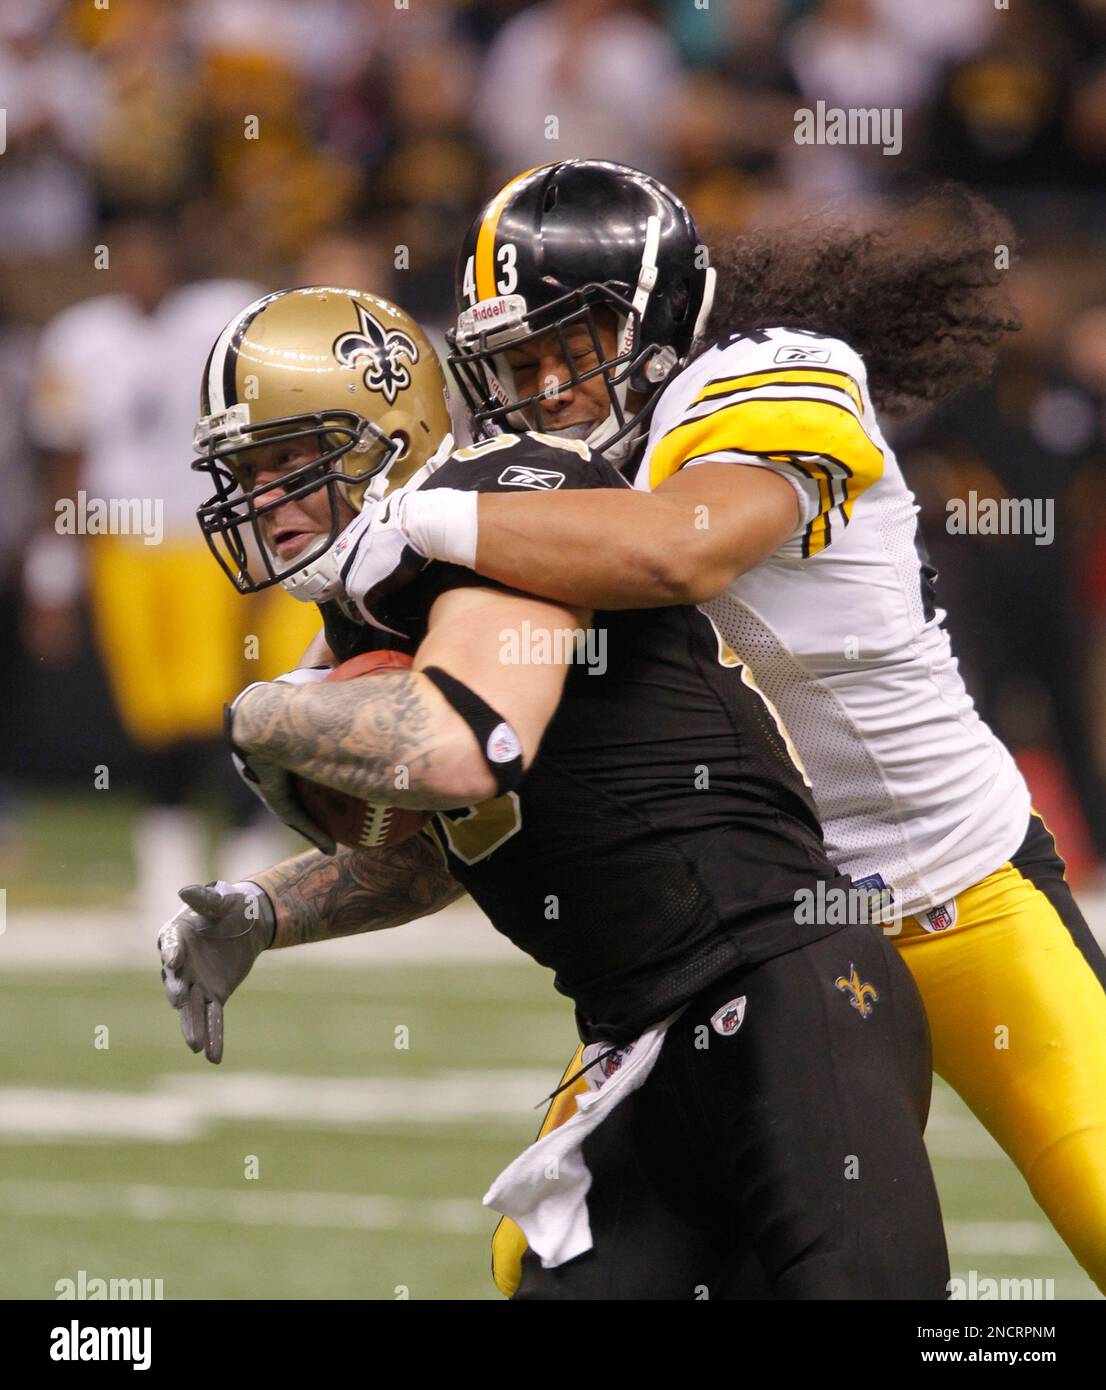 New Orleans Saints tight end Jeremy Shockey (88) stopped by Pittsburgh  Steelers safety Troy Polamalu (43) during an NFL football game at the  Louisiana Superdome in New Orleans, Sunday, Oct. 31, 2010. (